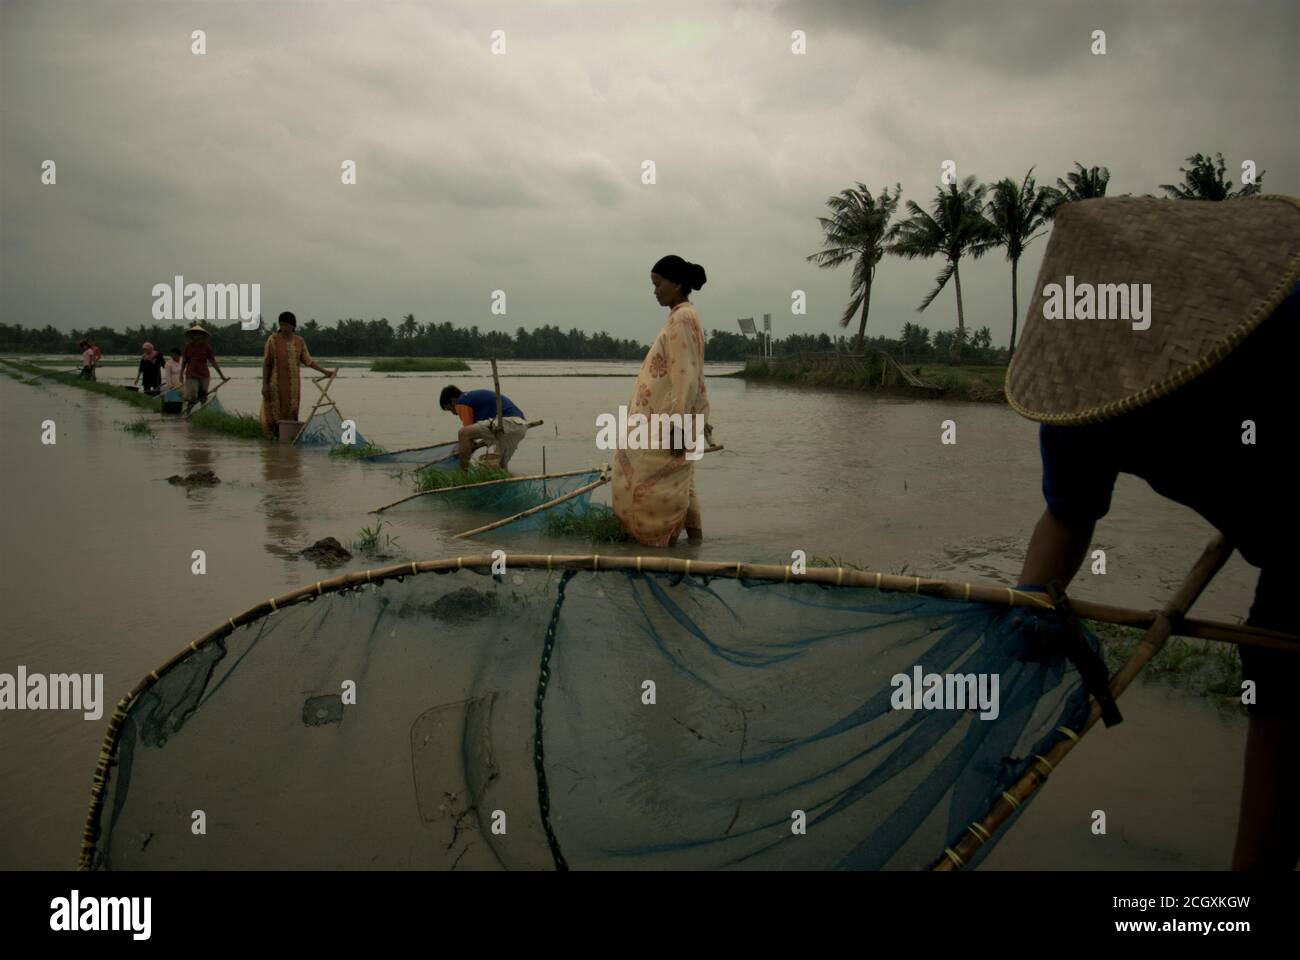 A woman farmer handling pushnet as she and fellow farmers fish on a flooded rice field during rainy season in Karawang regency, West Java, Indonesia. Stock Photo